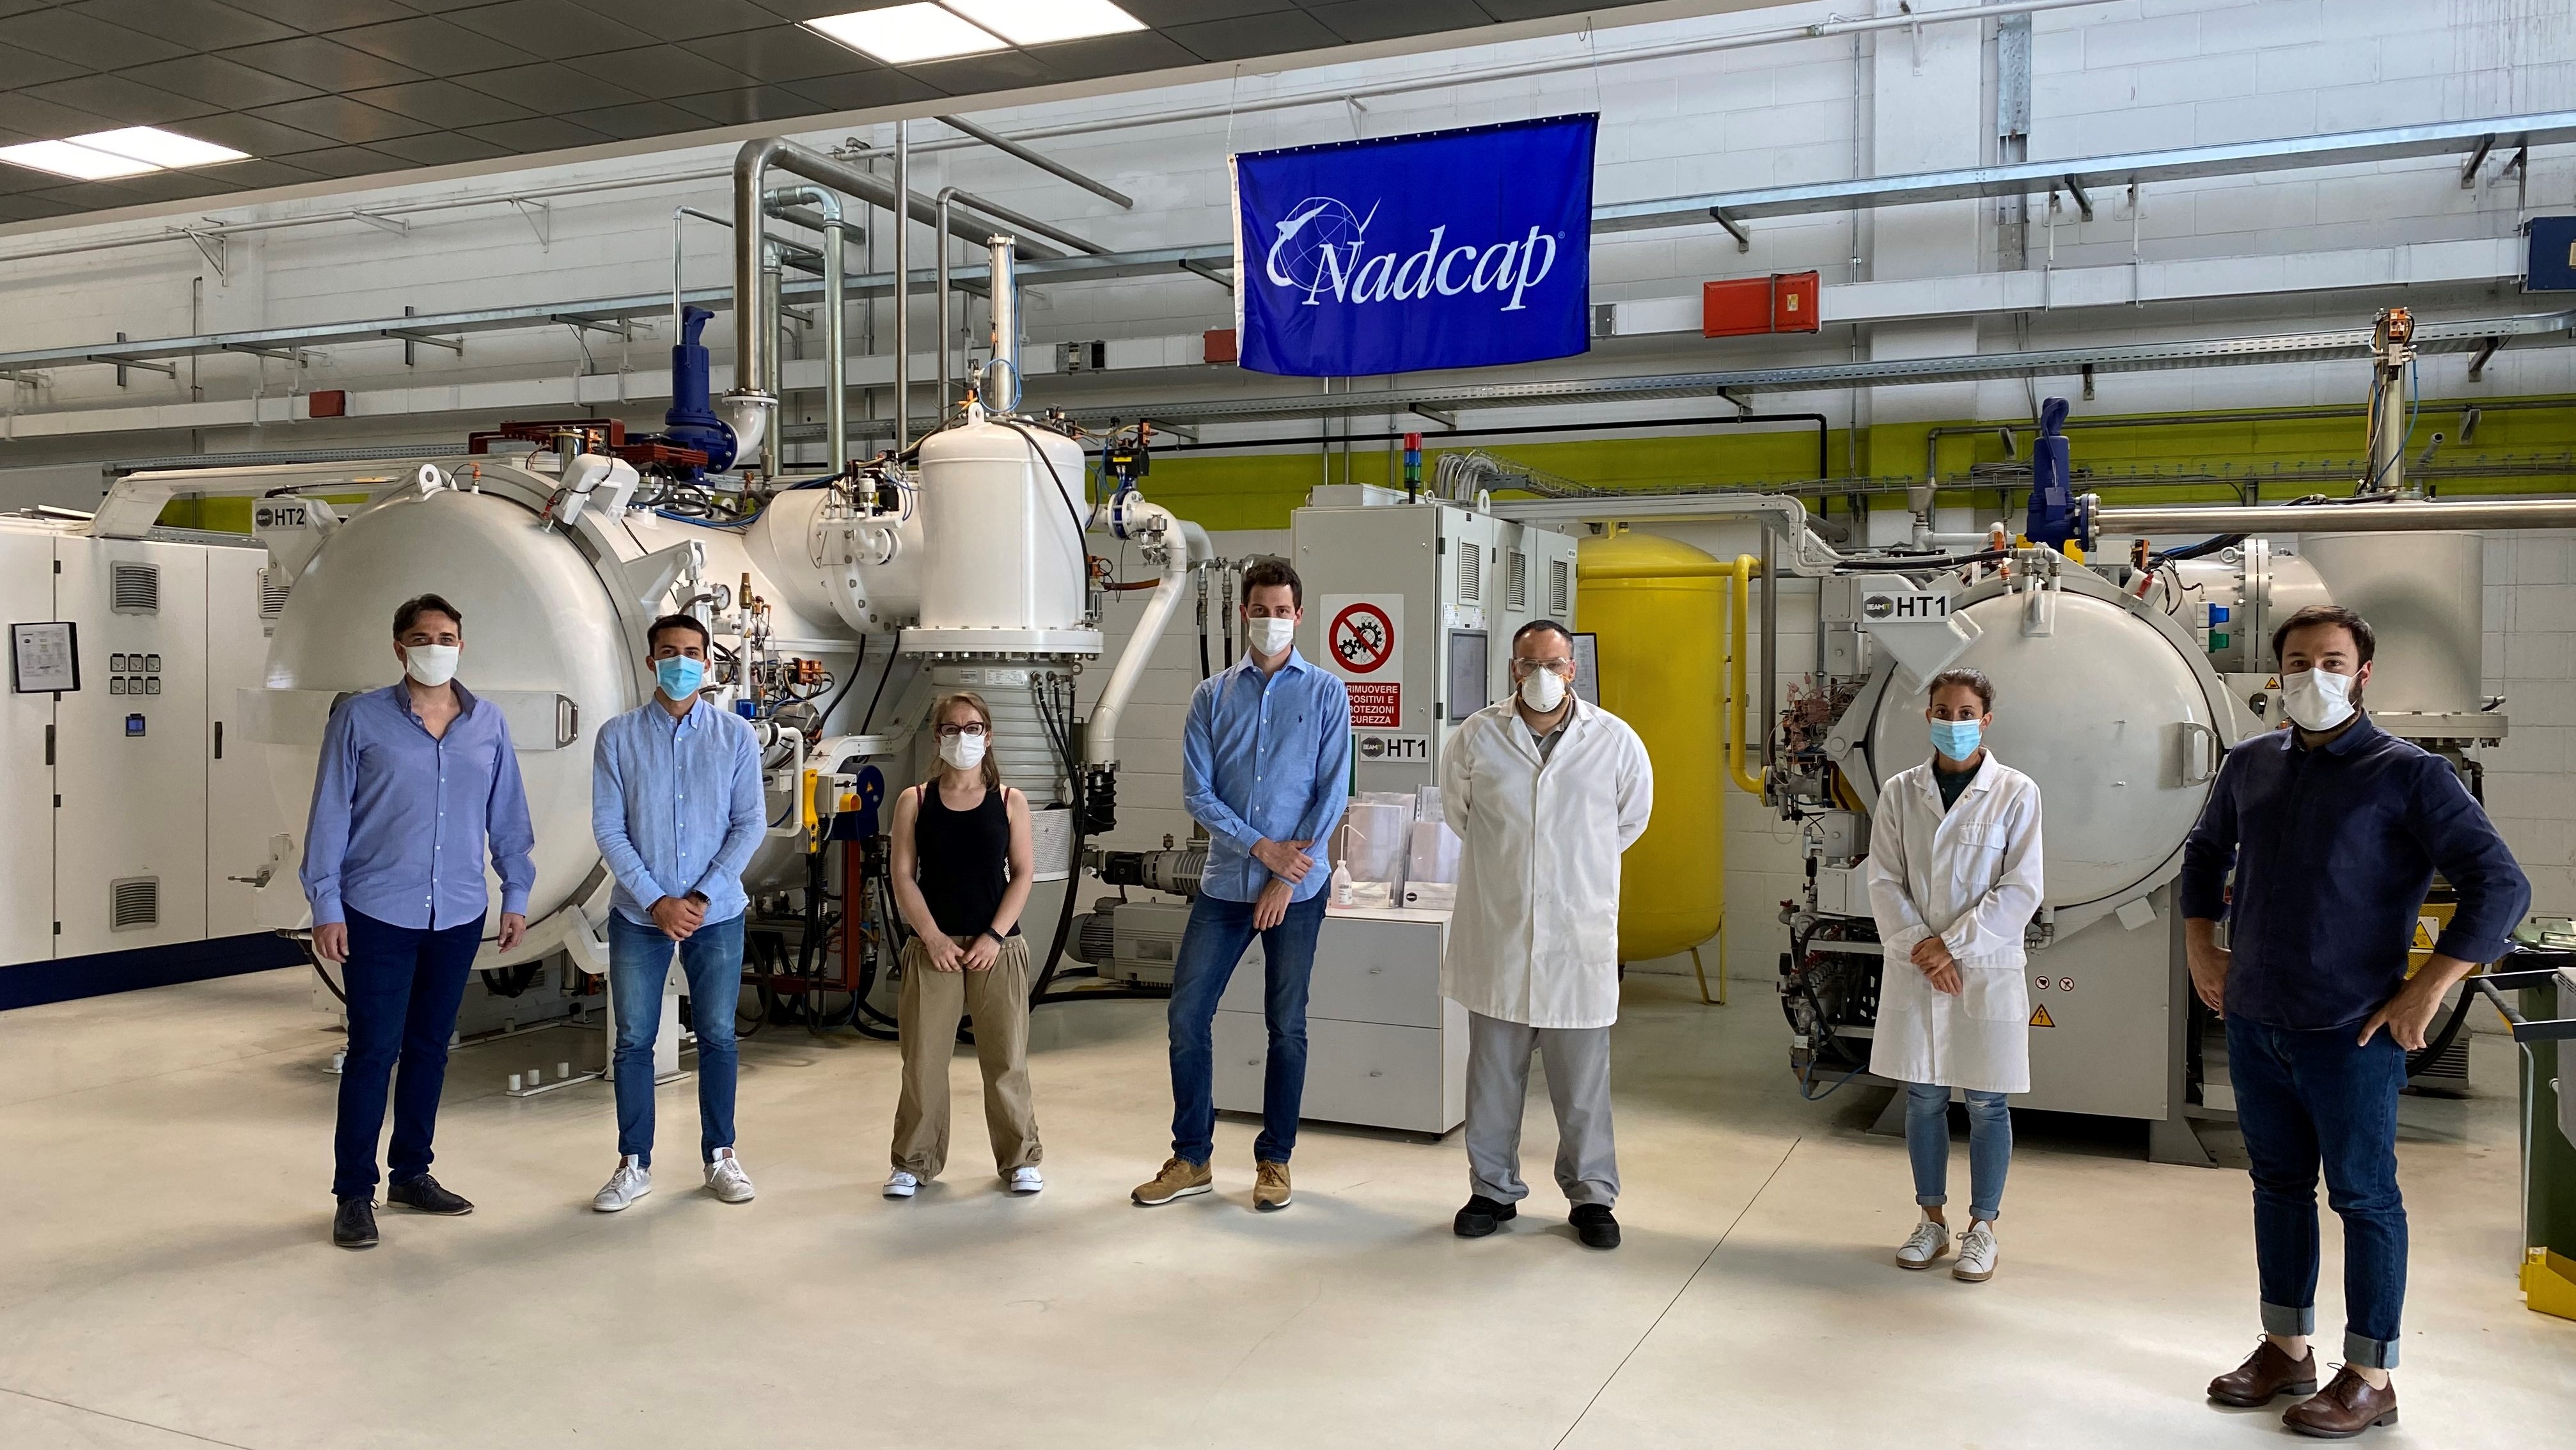 Italian service bureau BEAMIT's team (pictured) have achieved NADCAP accreditation for its heating processing treatments. Photo via BEAMIT.